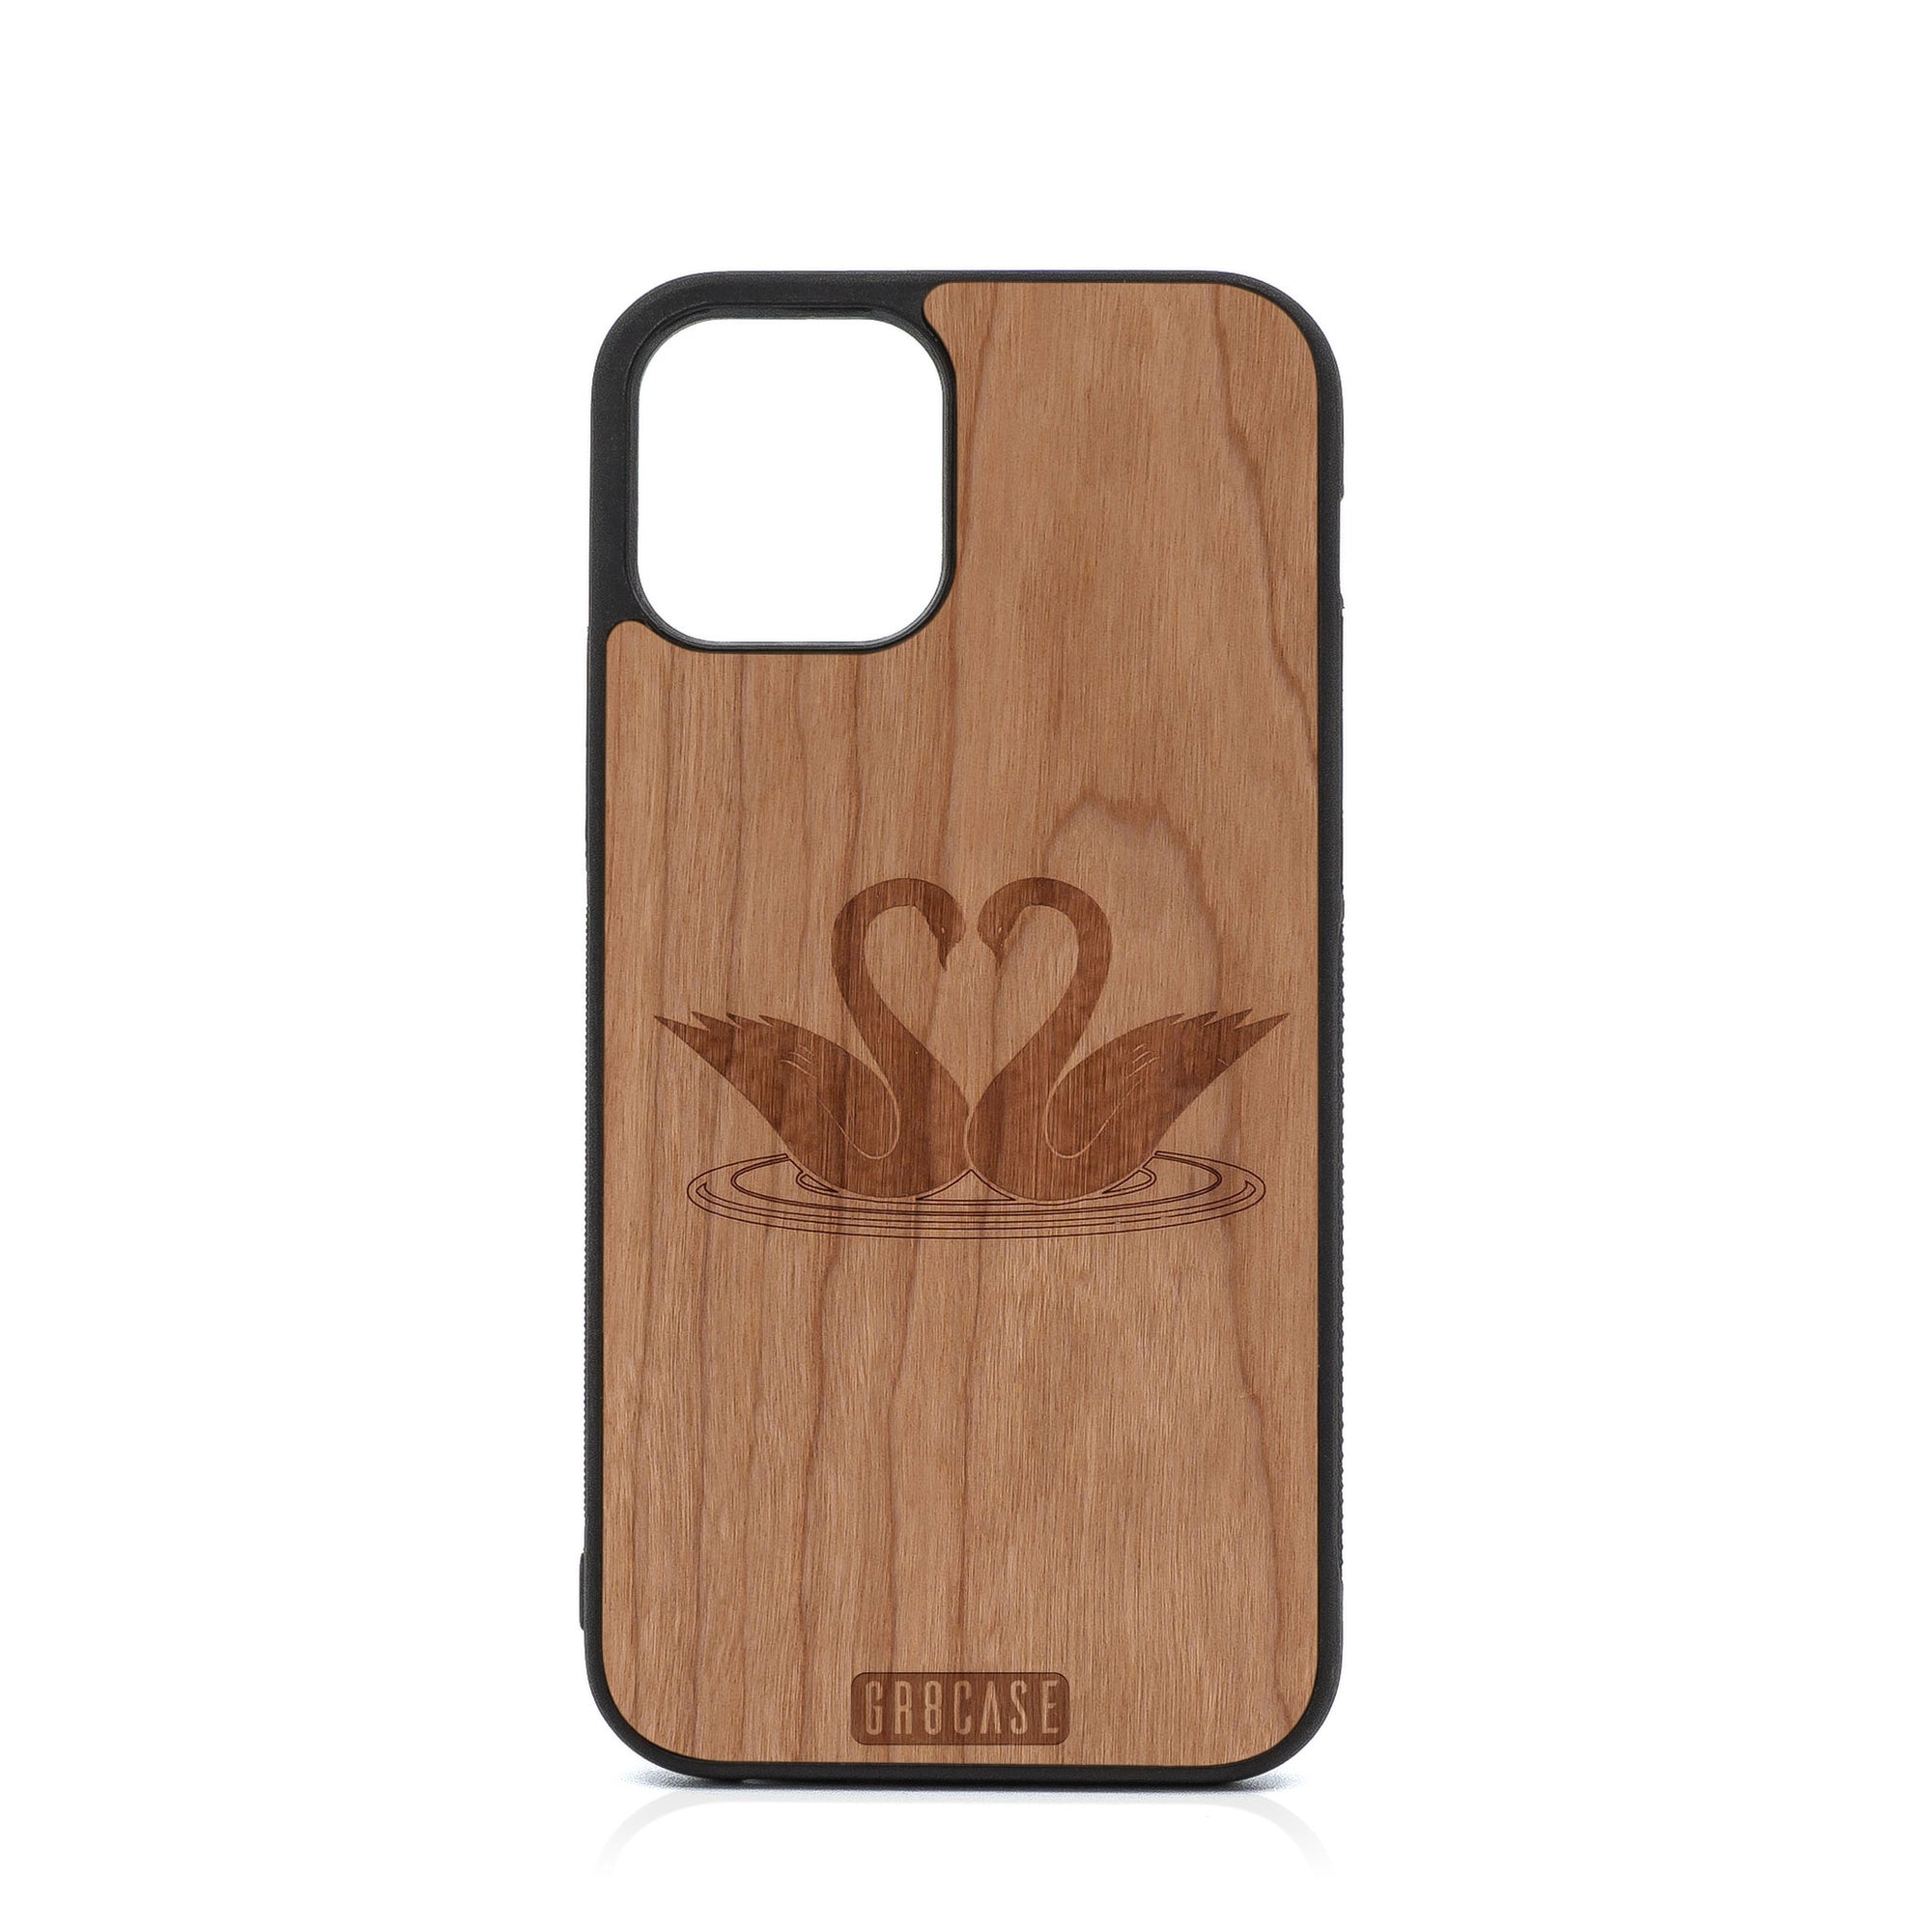 Swans Design Wood Case For iPhone 12 Pro